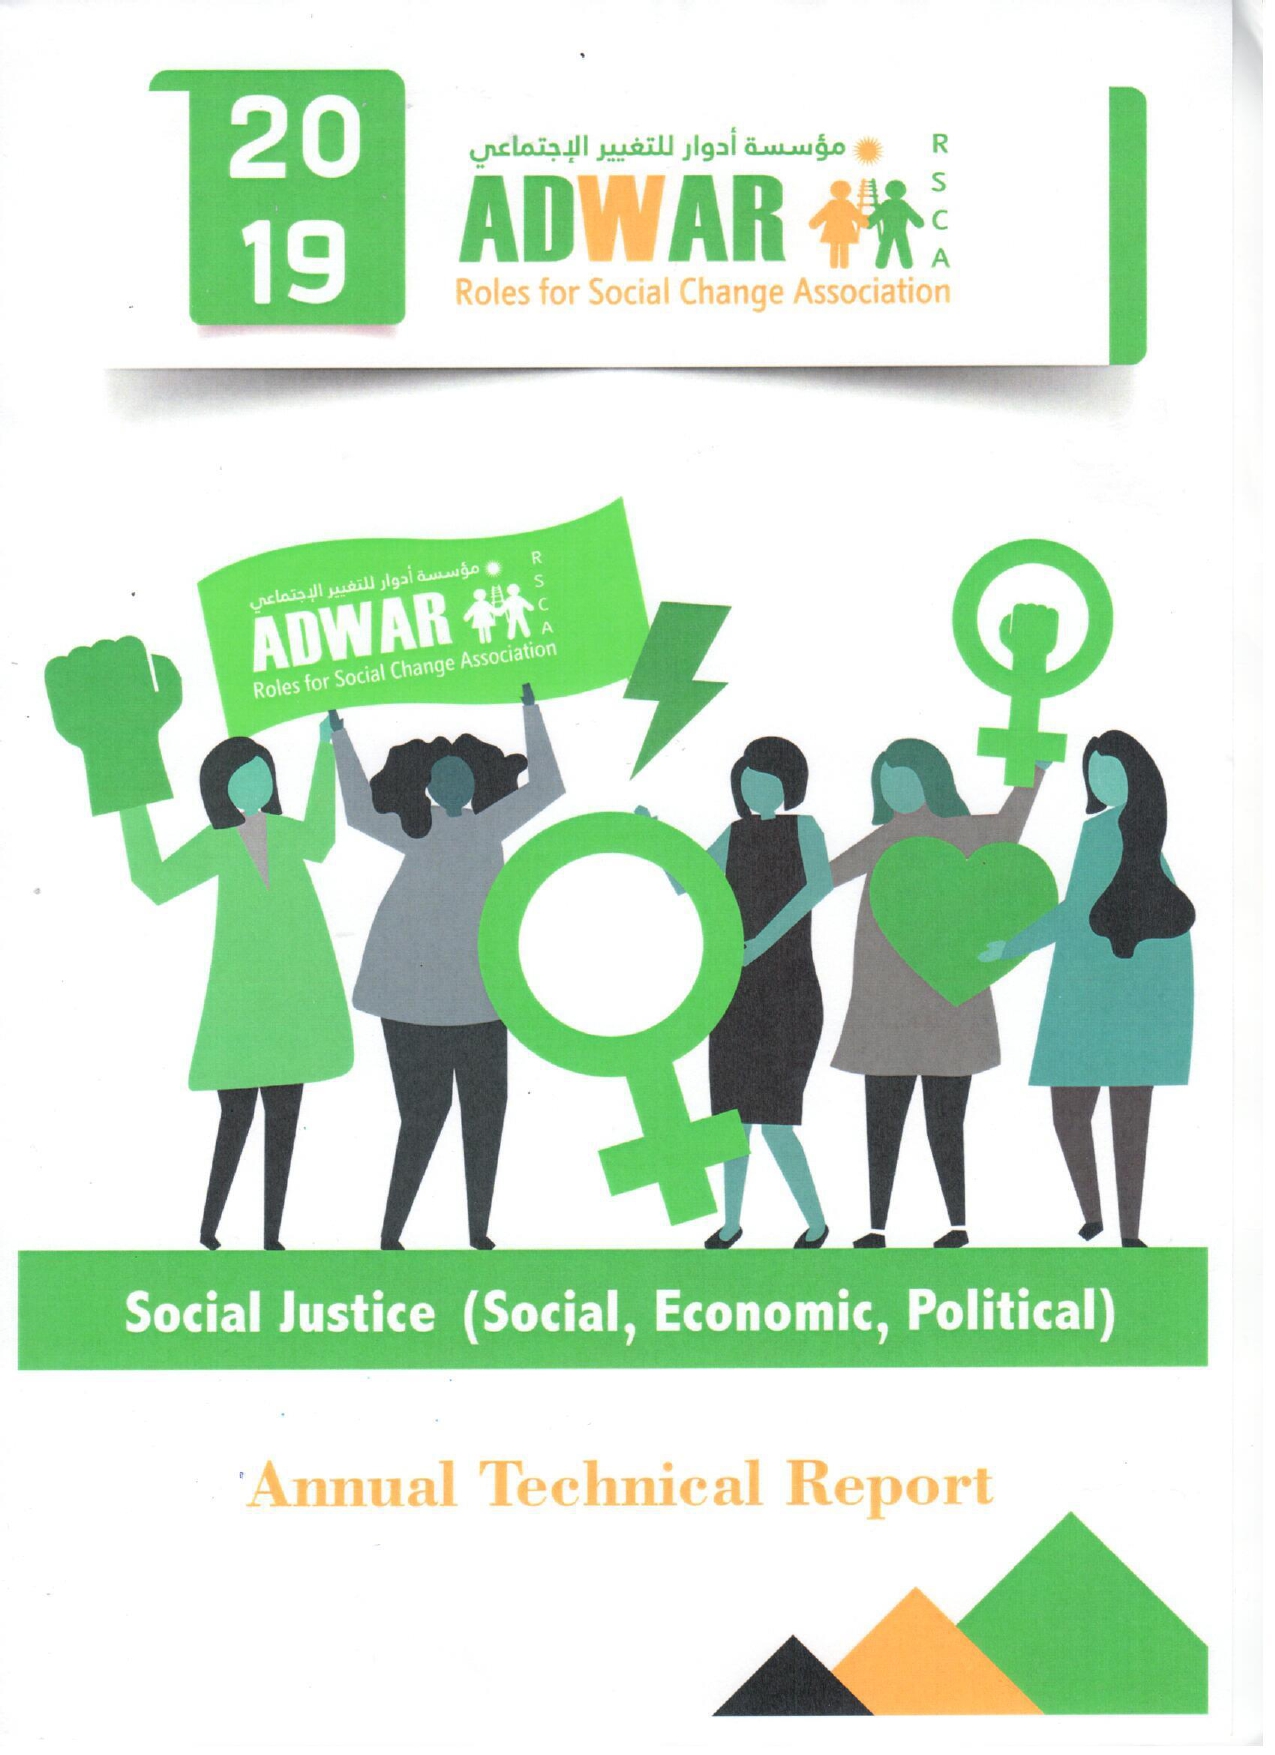  Annual Technical Report